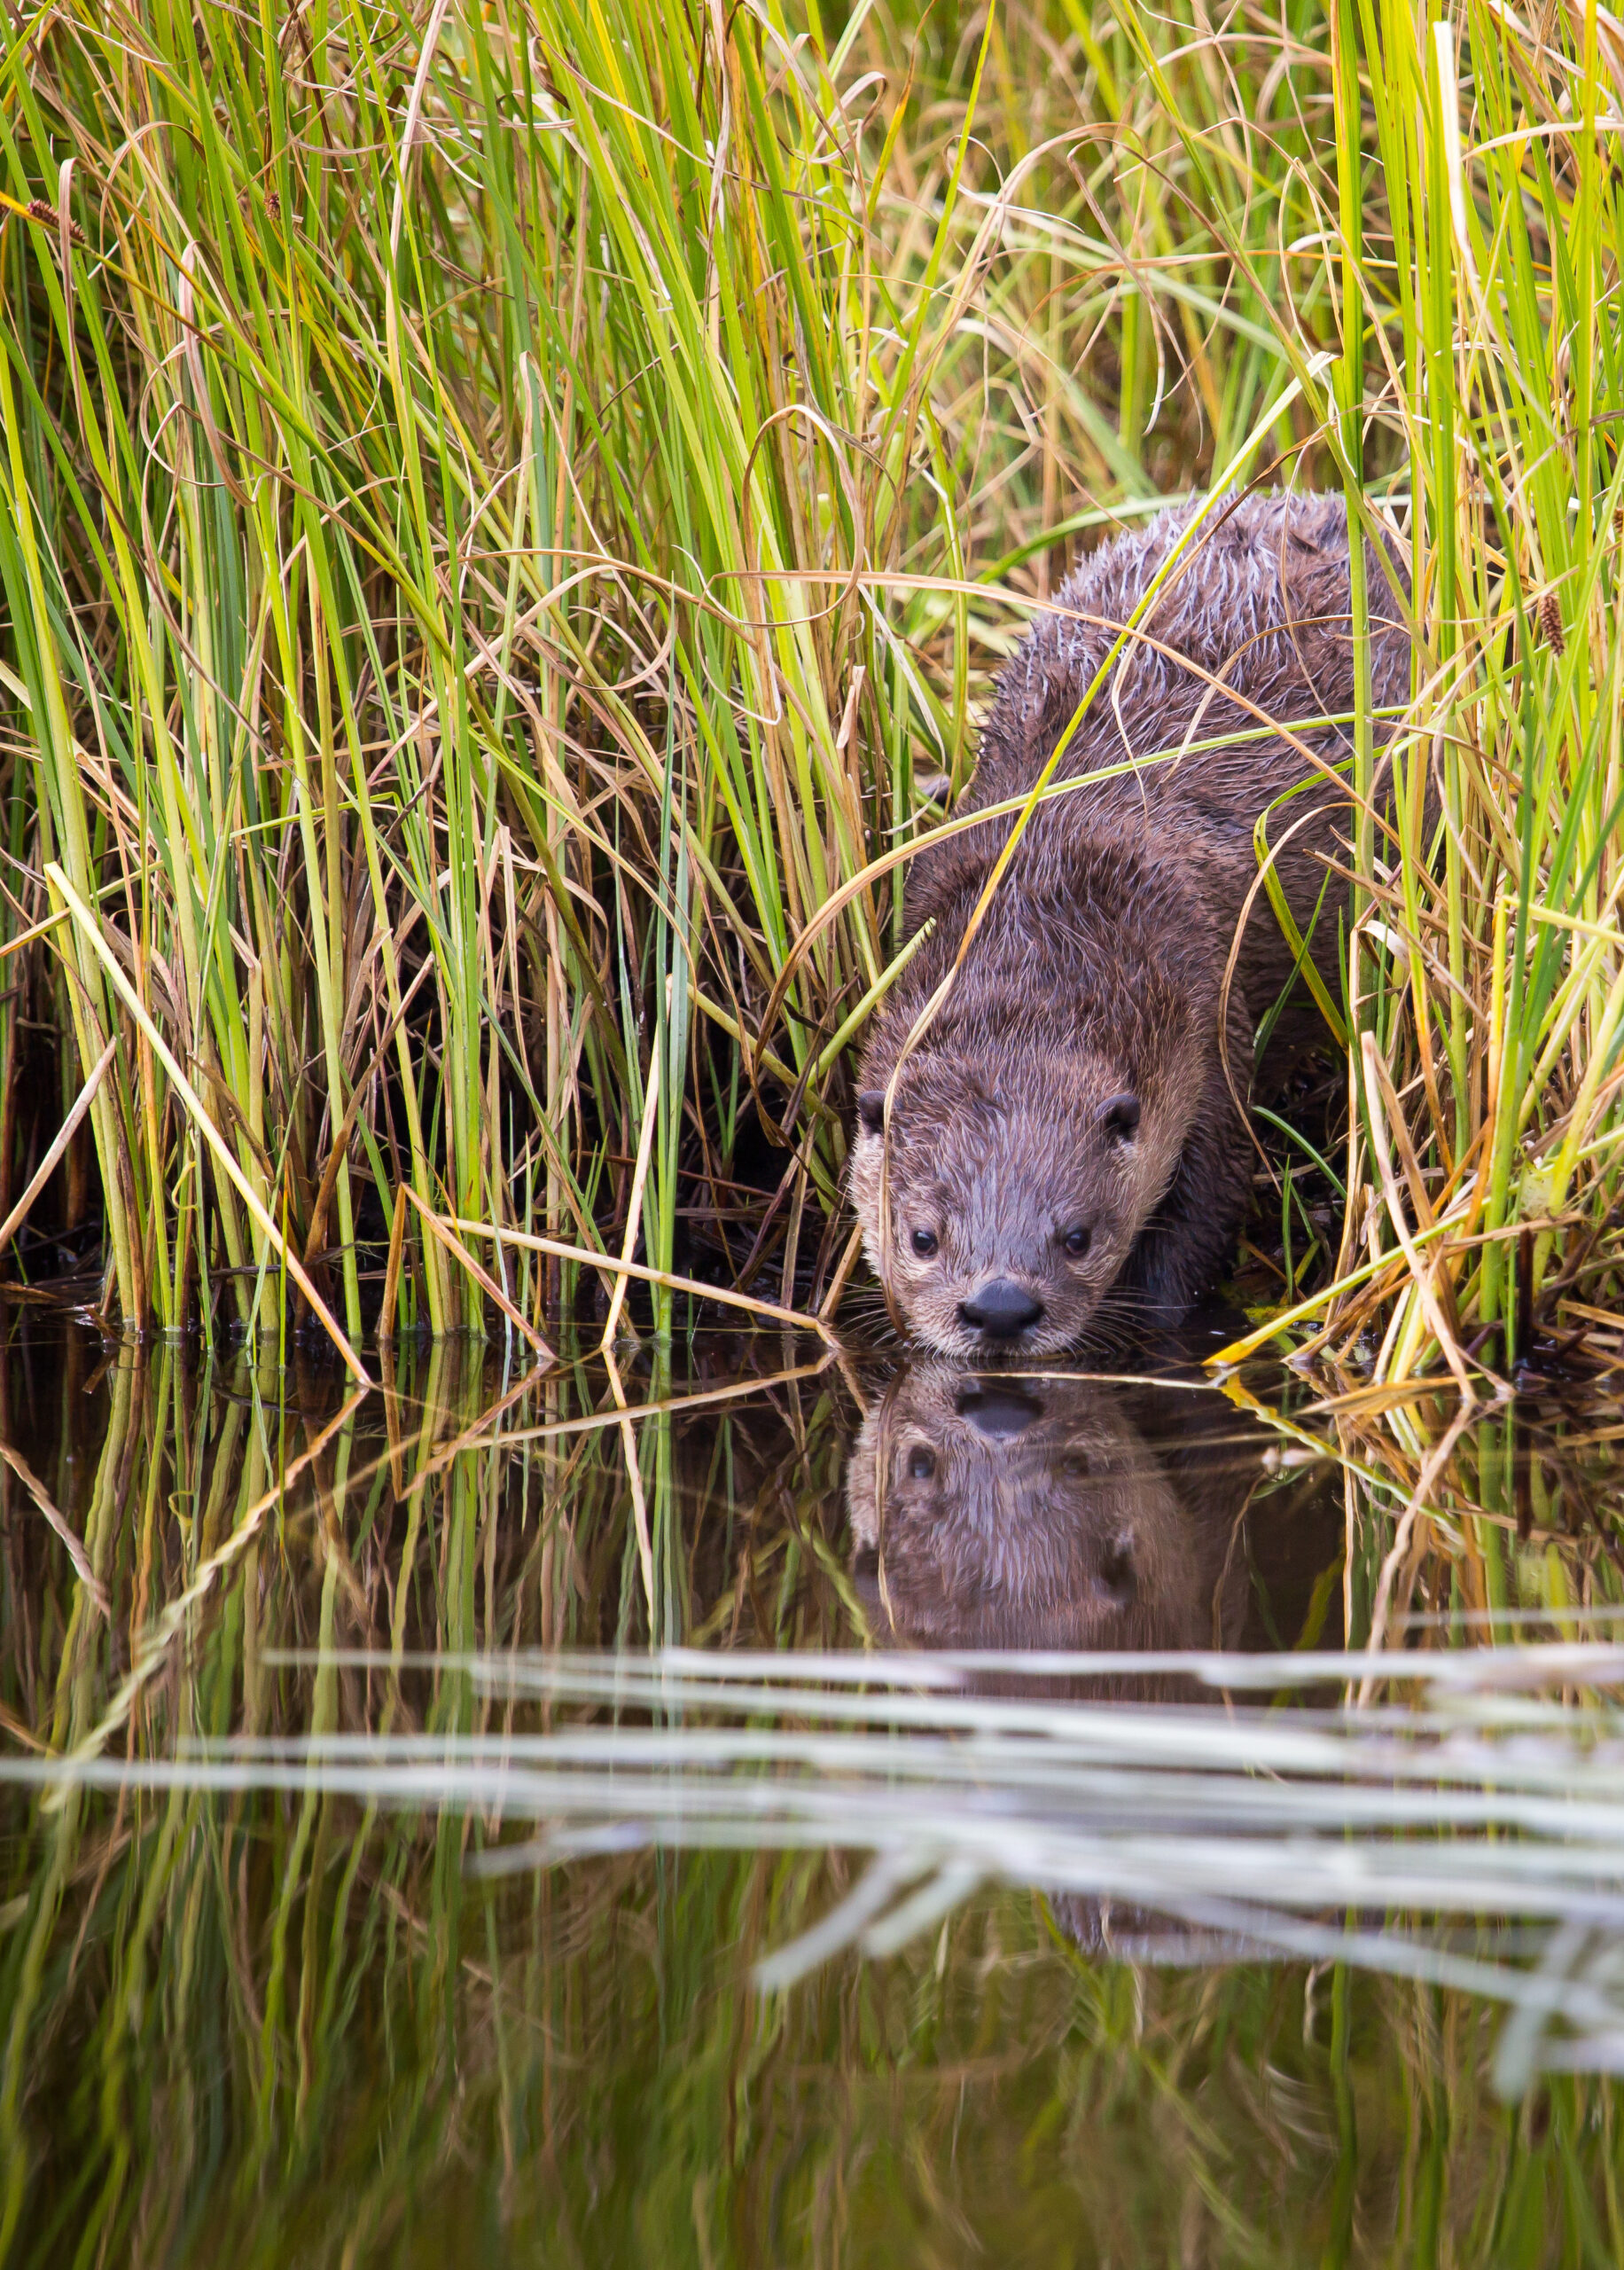 An otter (dark brown with small ears) pokes its mouth into the water.